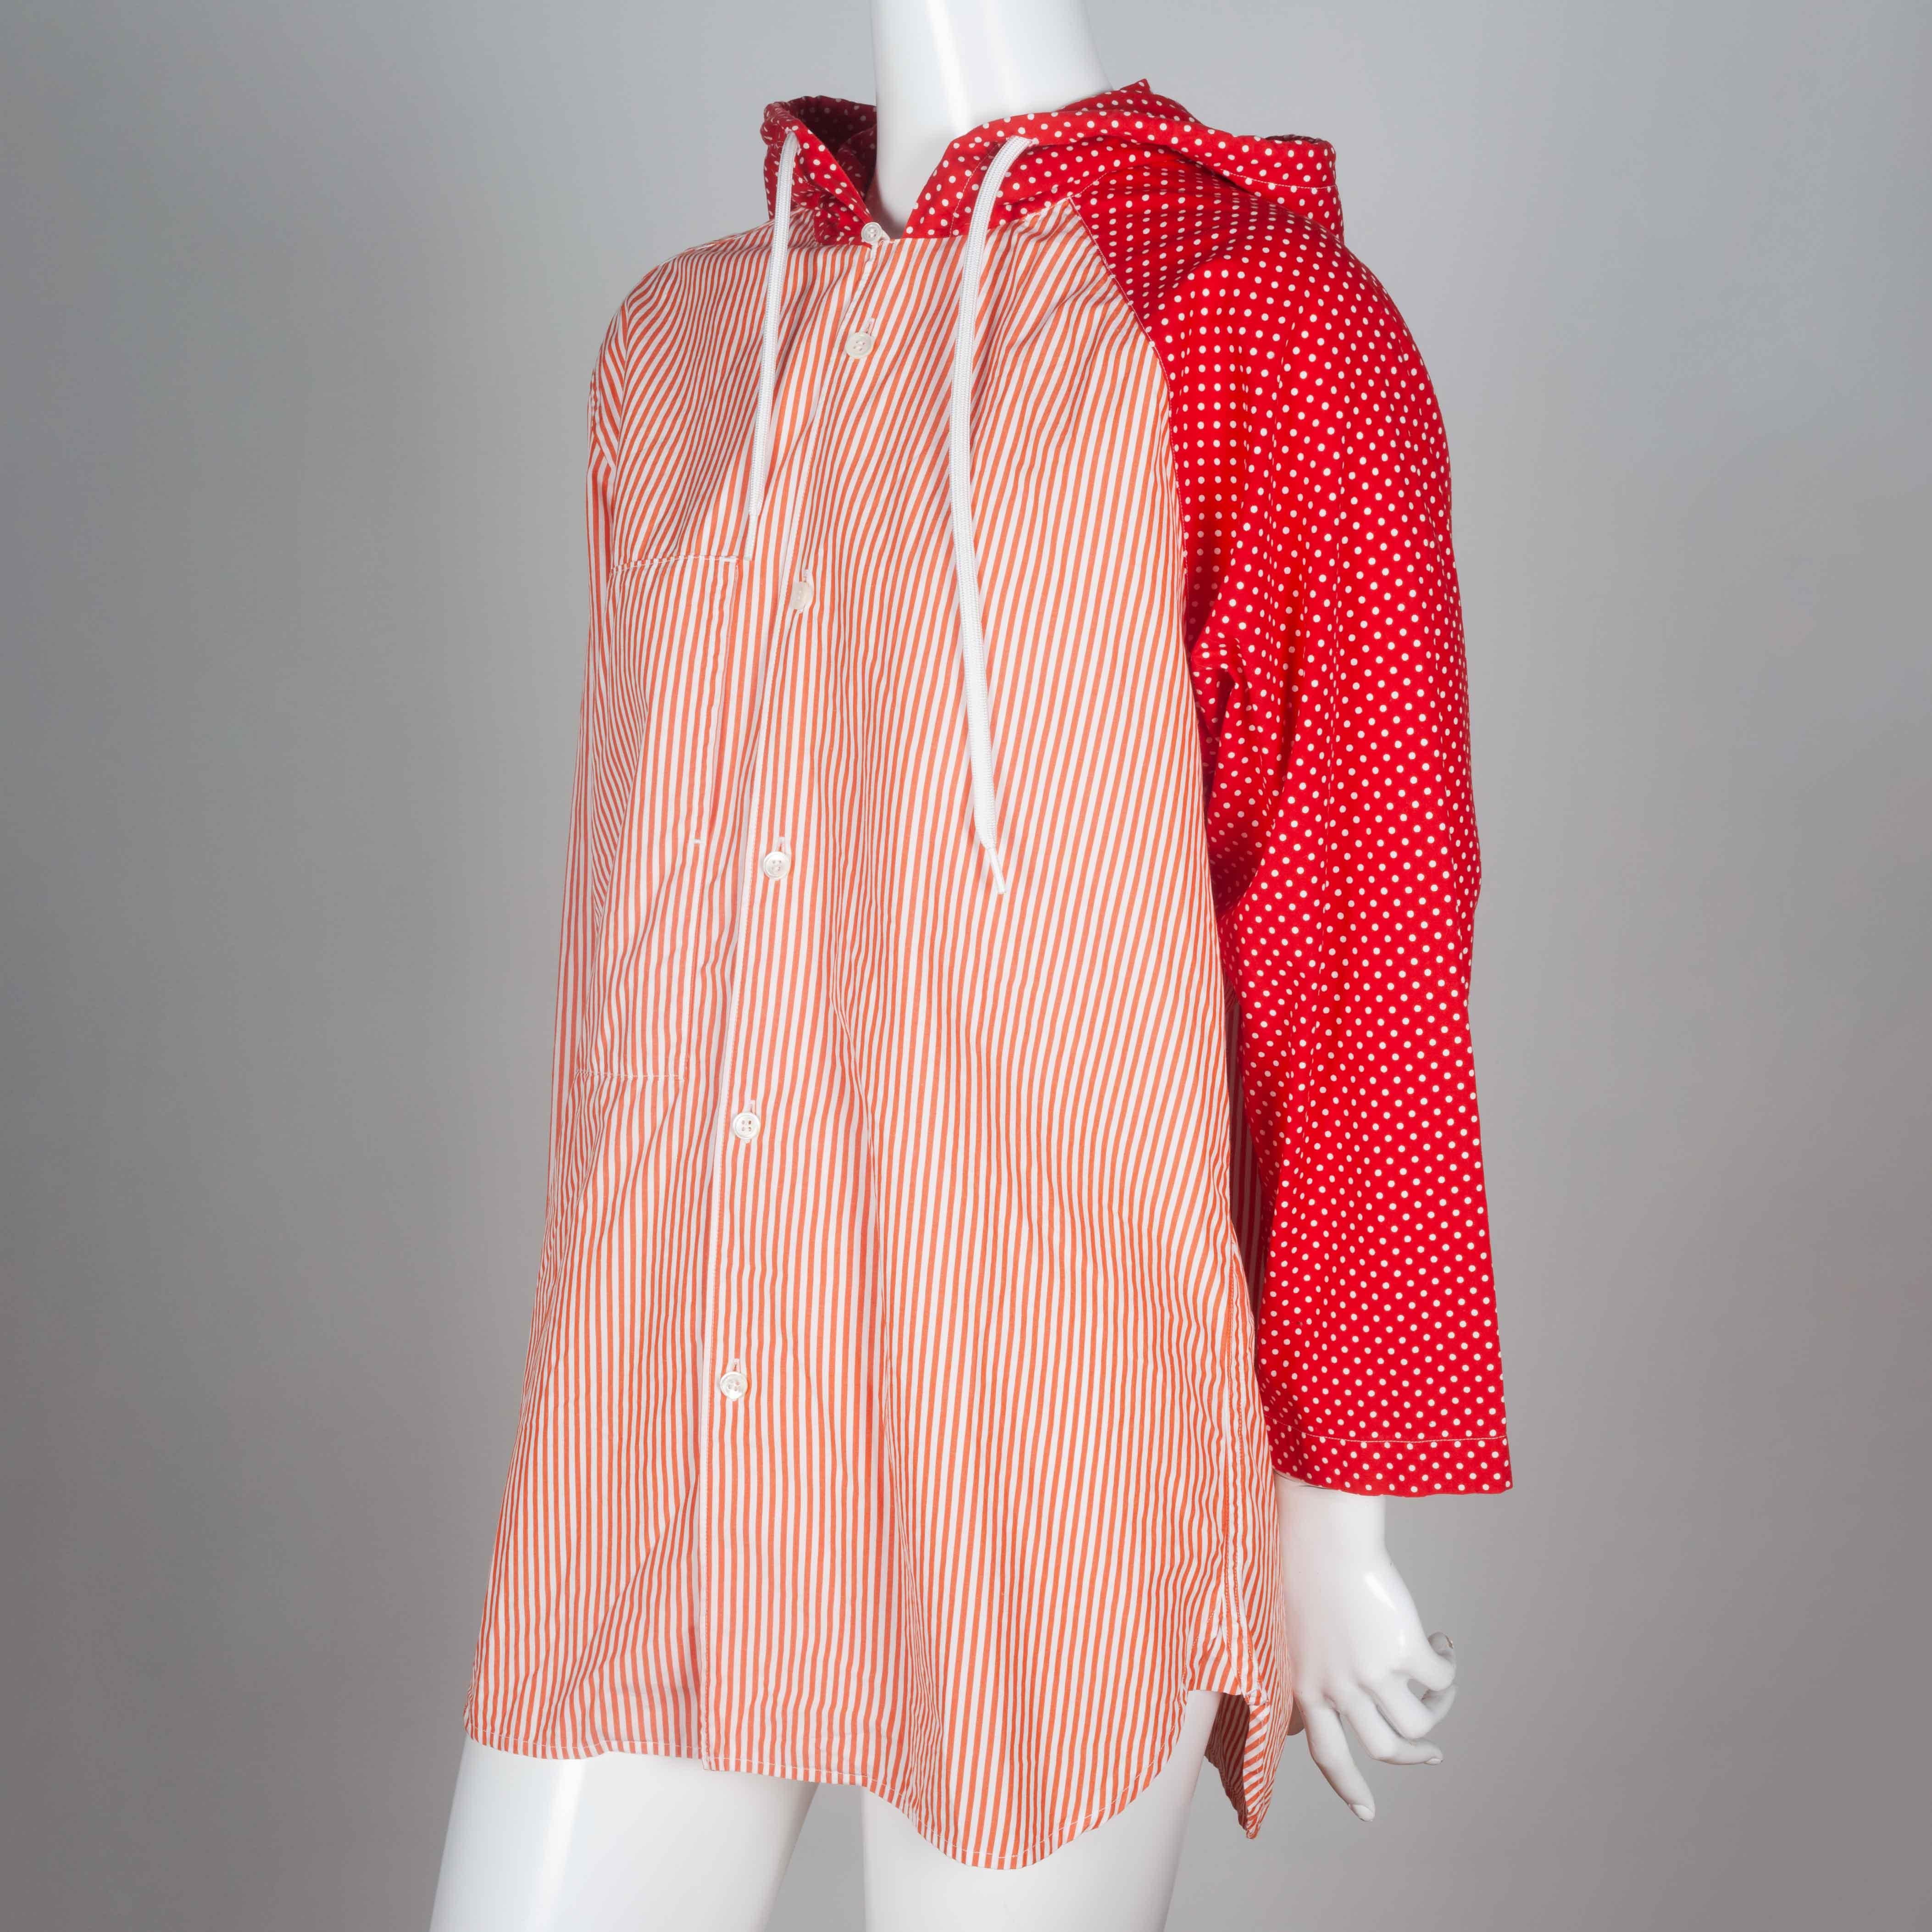 Comme des Garçons red and white poplin shirt with draw string hood and asymmetric pattern. A raglan sleeve with red and white polka dot pattern on one side carries on to the hood, completing the rest of the shirt that is in red and white pinstripes.